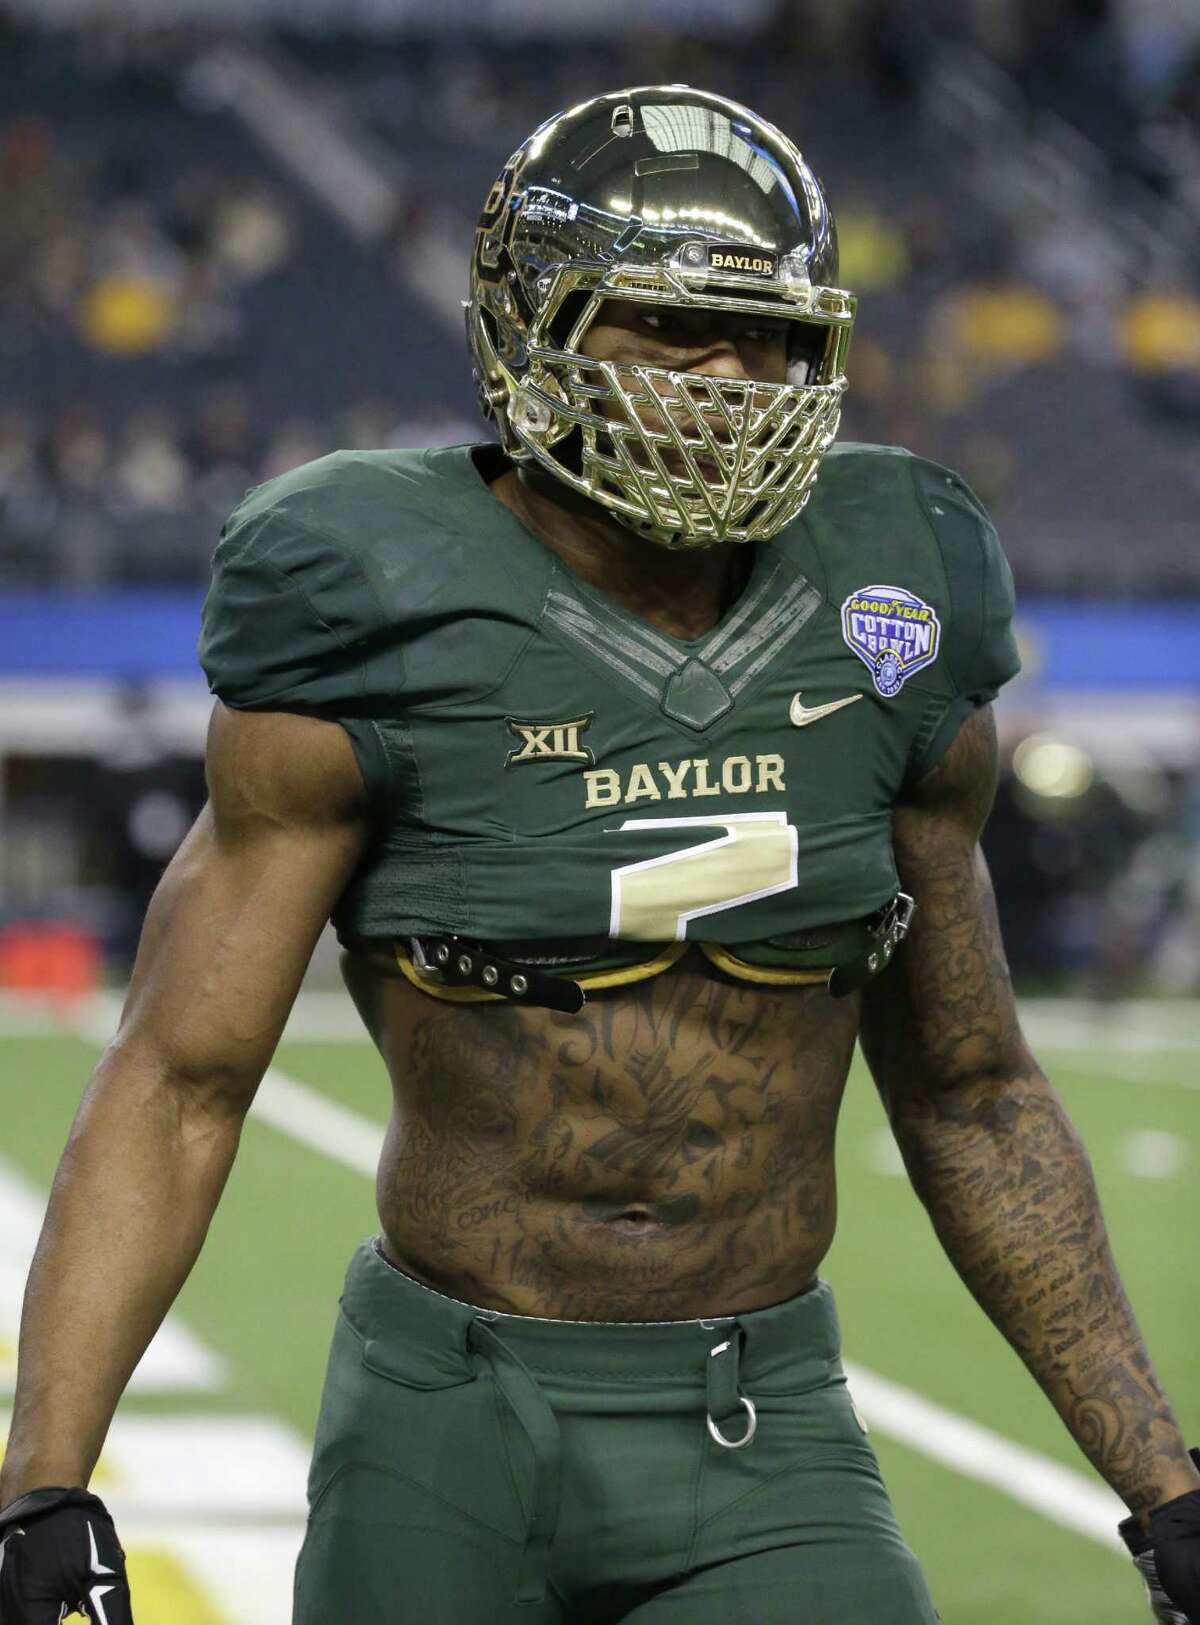 Baylor defensive end Shawn Oakman (2) warms up before the Cotton Bowl NCAA college football game Thursday, Jan. 1, 2015, in Arlington, Texas. (AP Photo/LM Otero)